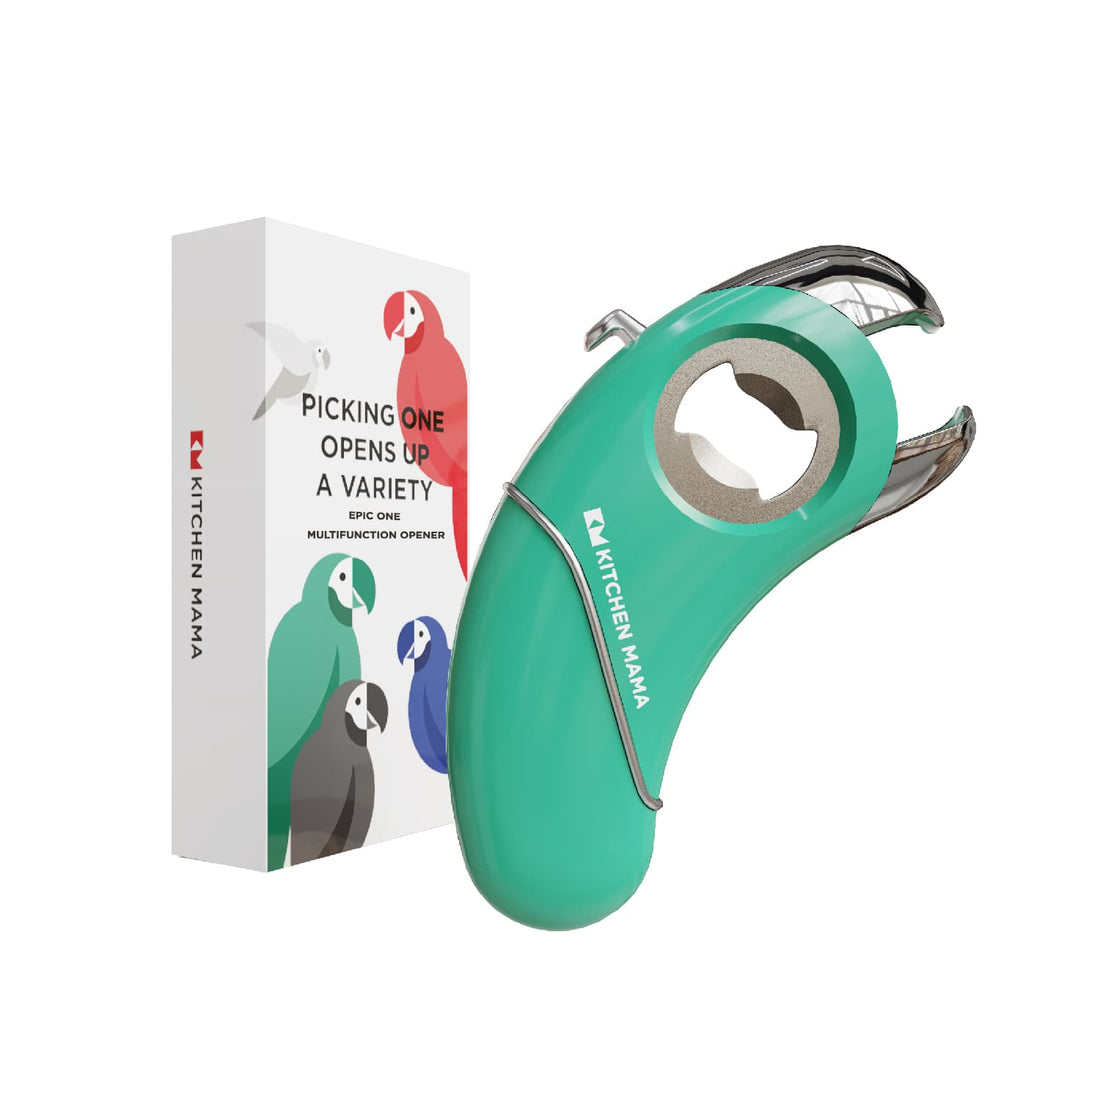 Epic One Multifunction Opener - Picking One Opens Up A Variety, MO5600-T, Teal